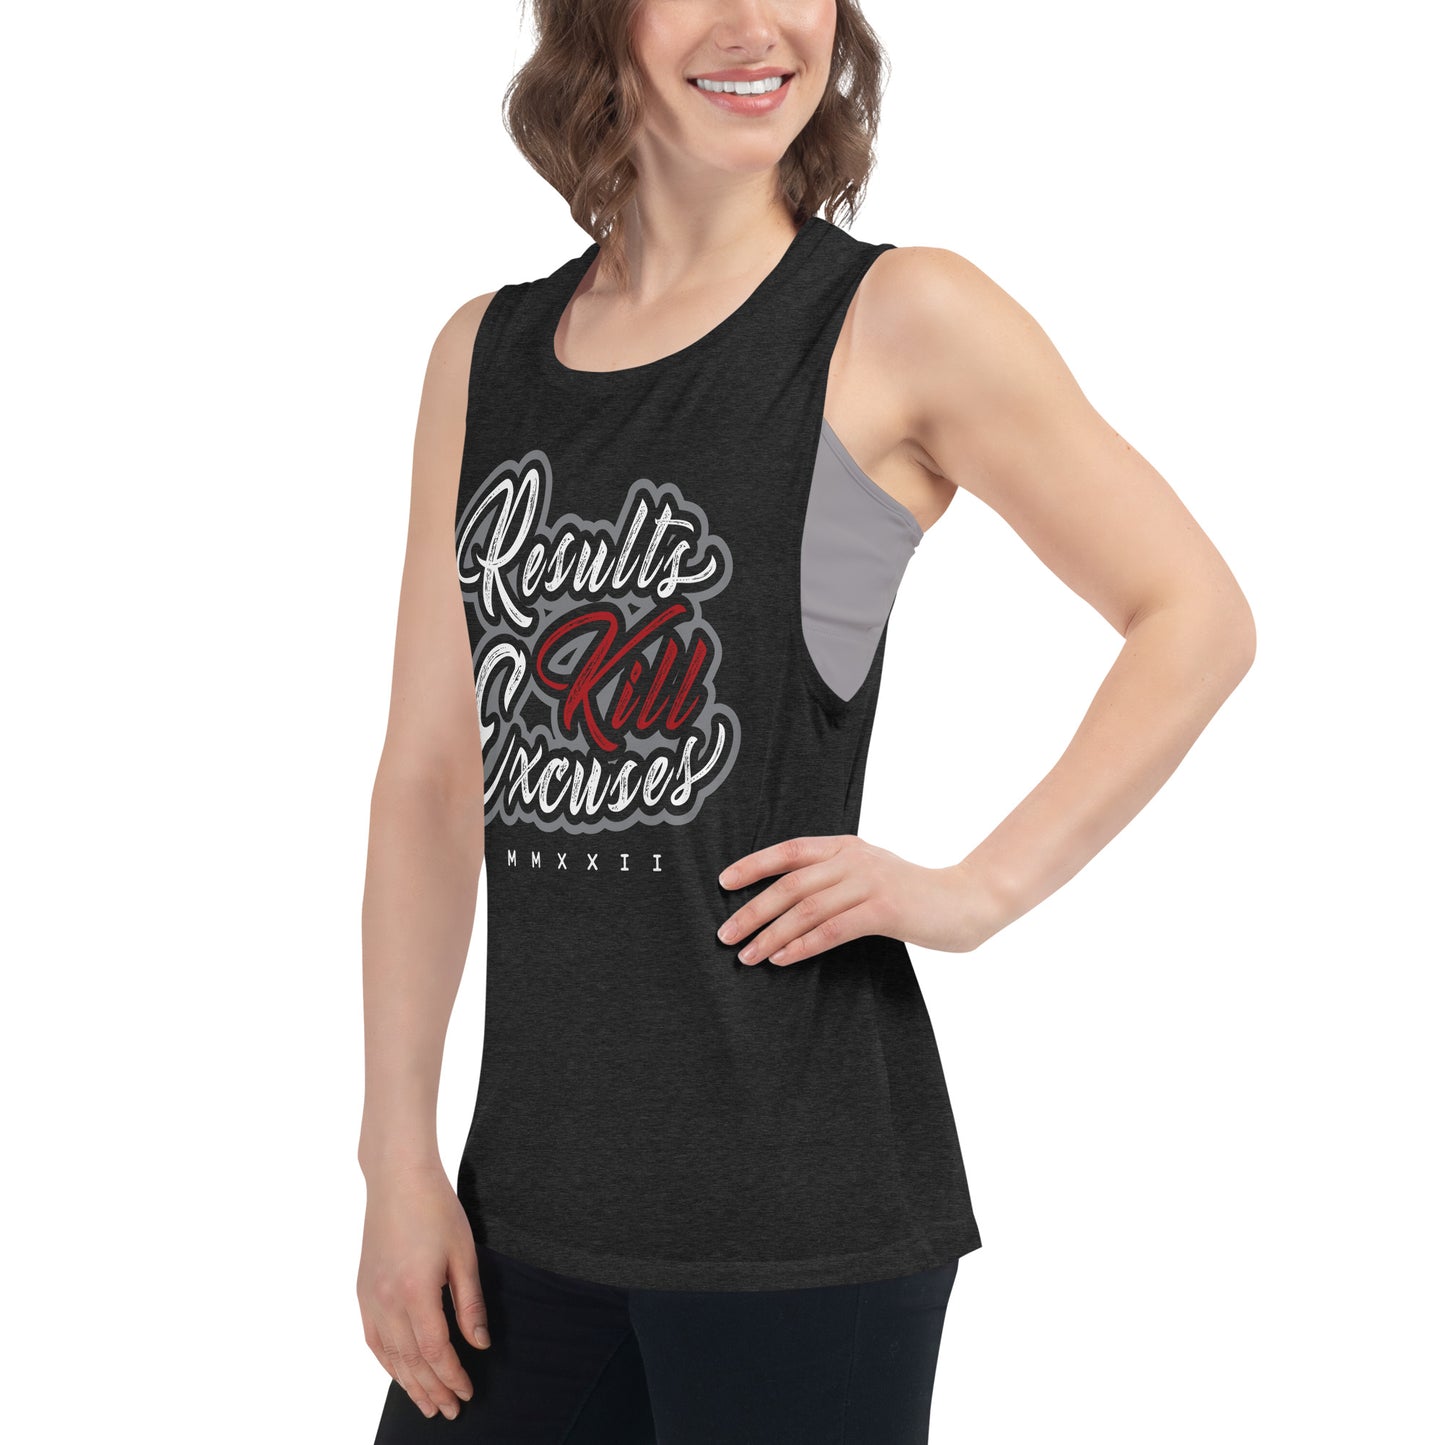 RESULTS KILL EXCUSES SCRIPTED WOMENS MUSCLE TANK